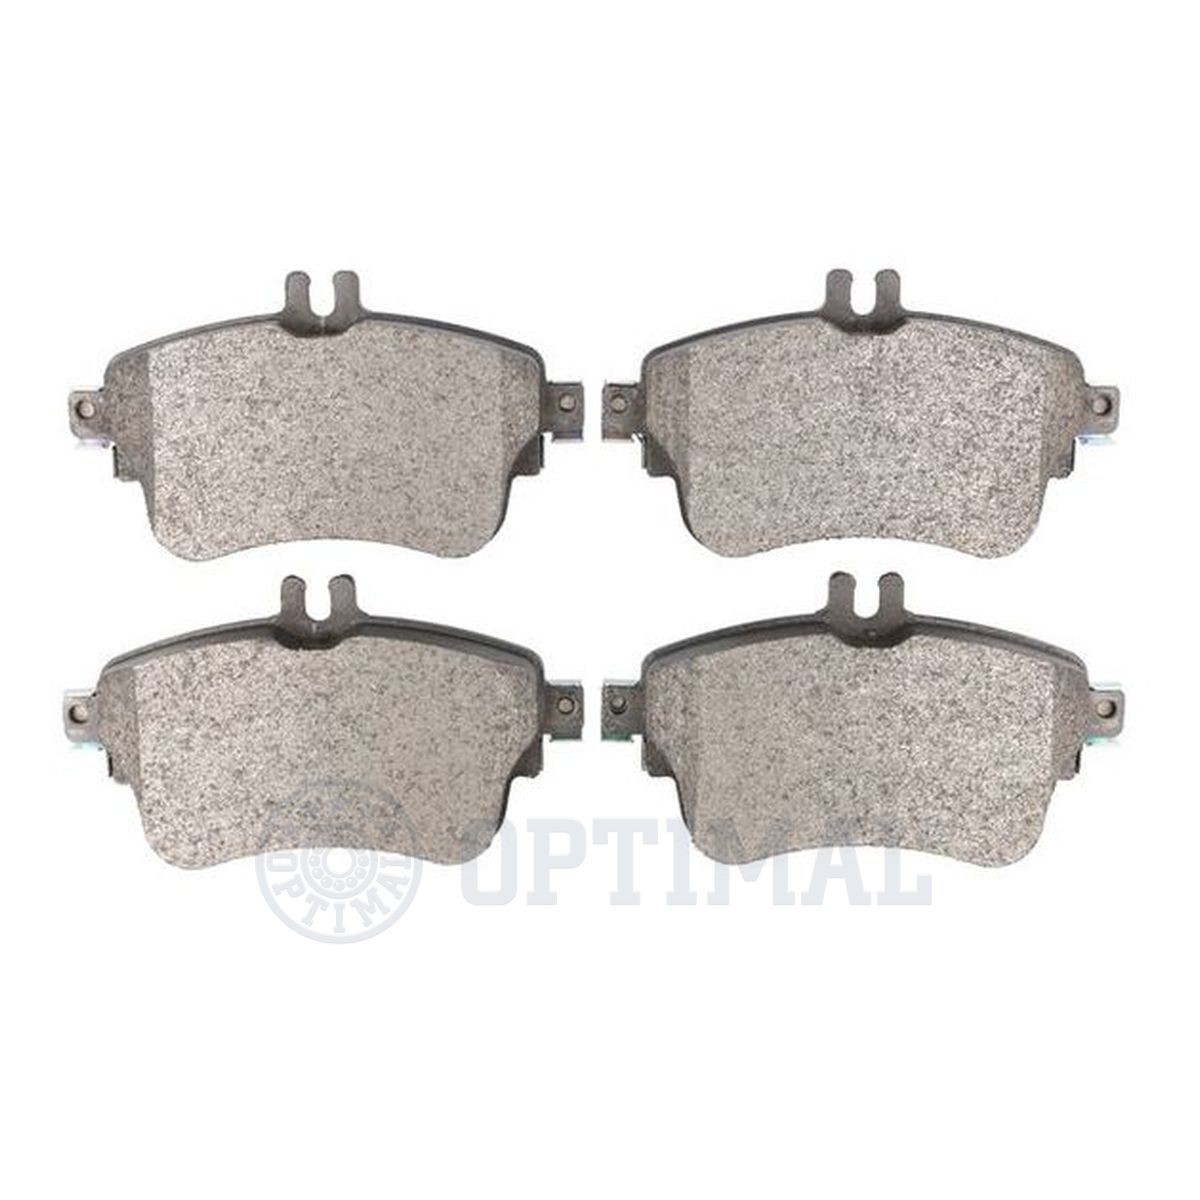 OPTIMAL Brake pad kit 12610 suitable for MERCEDES-BENZ B-Class, A-Class